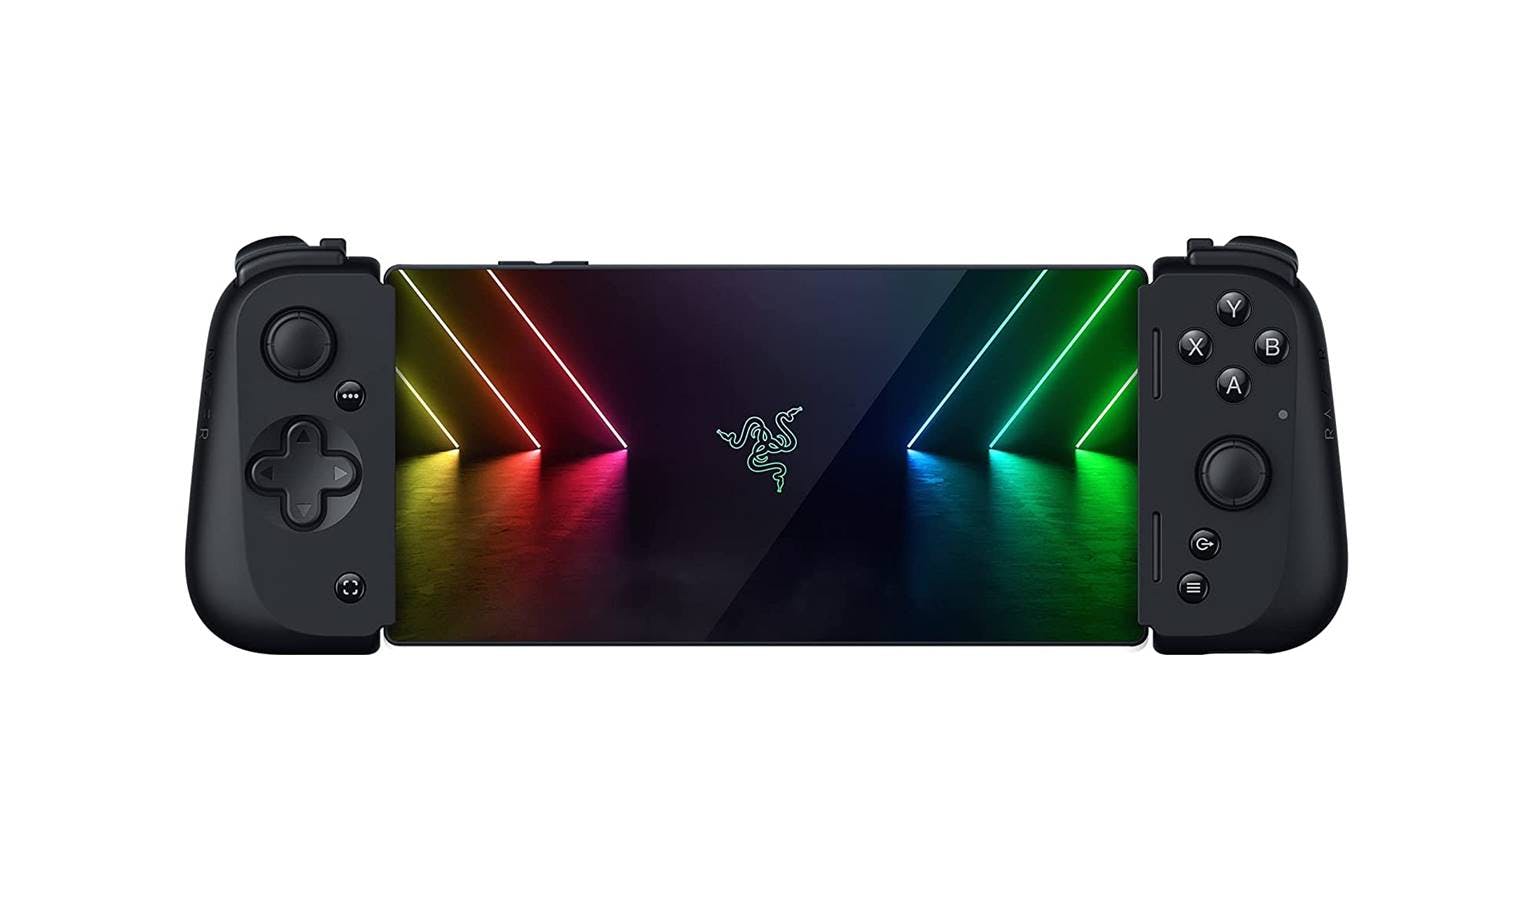 https://hnsgsfp.imgix.net/4/images/detailed/91/Razer_Kishi_V2_Android_Universal_Mobile_Gaming_Controller.jpg?fit=fill&bg=0FFF&w=1536&h=900&auto=format,compress